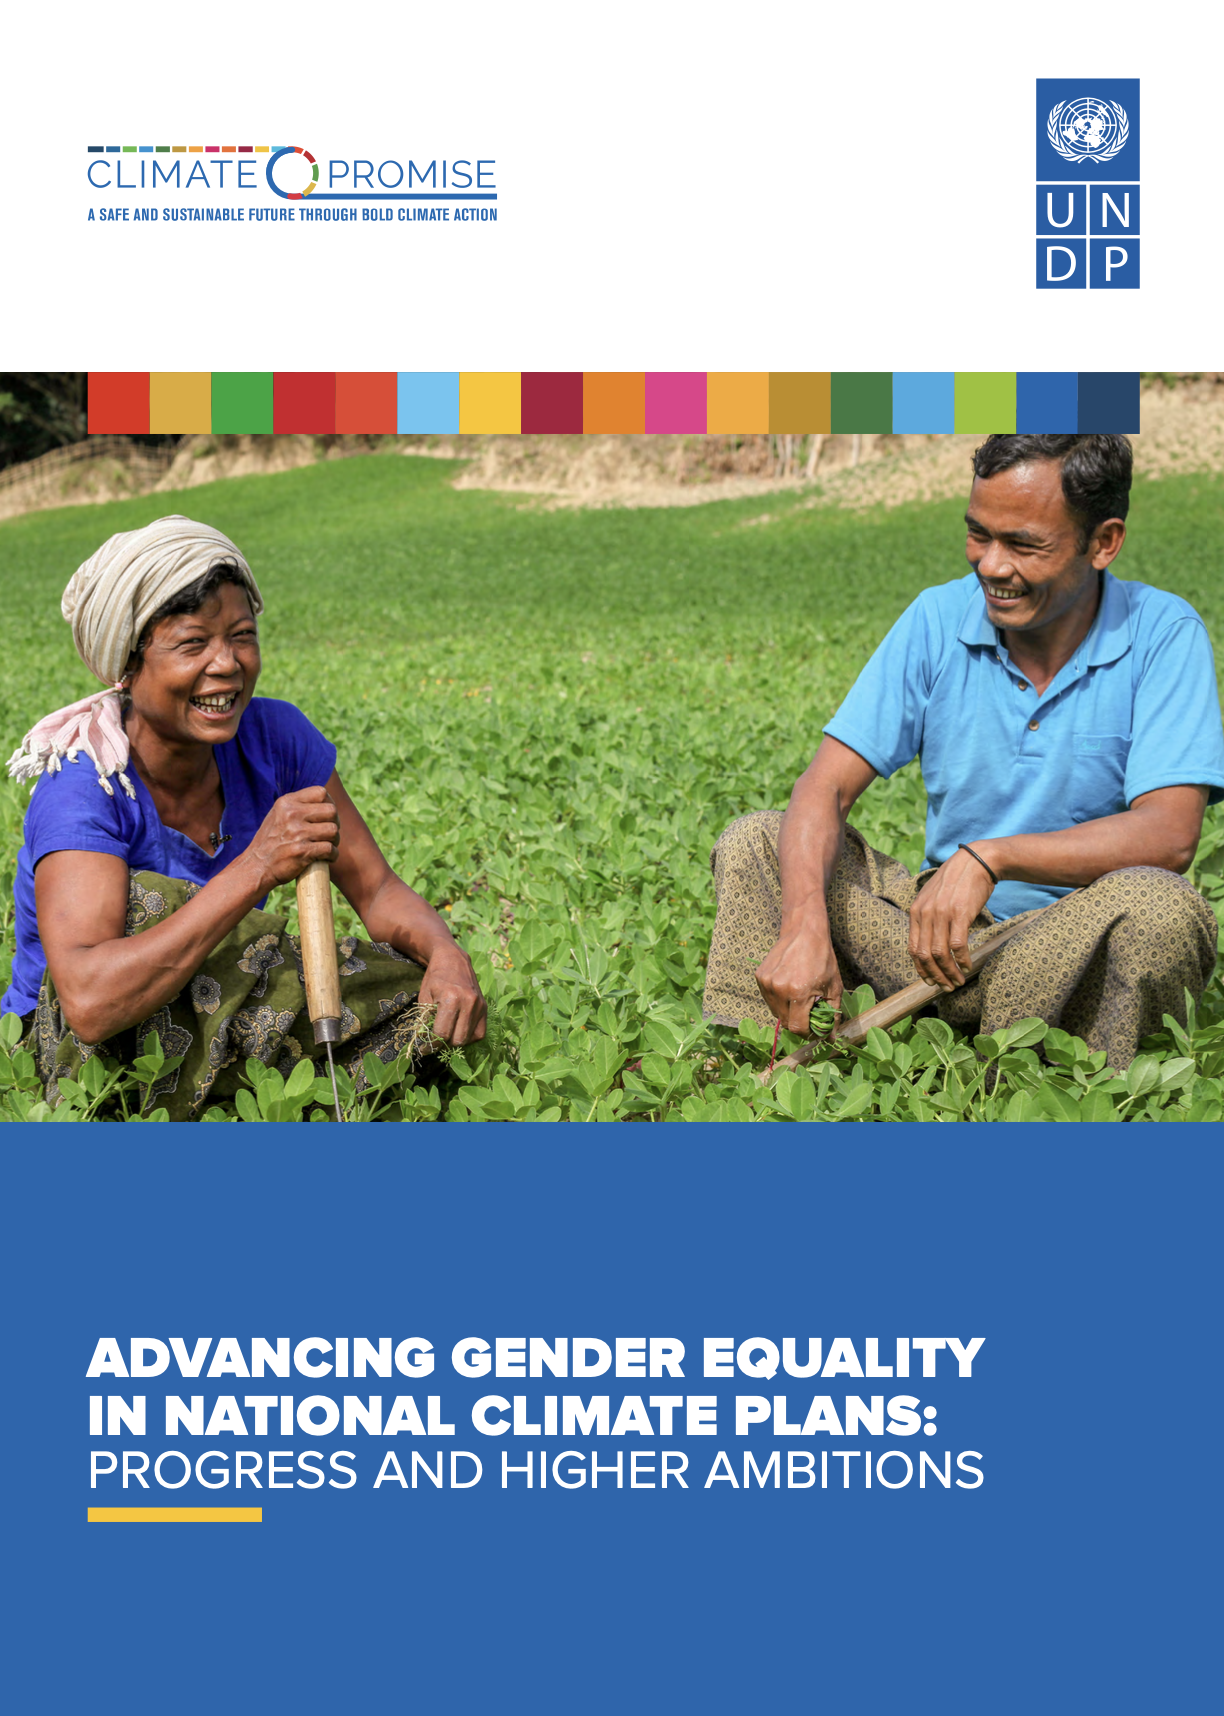 Advancing Gender Equality in National Climate Plans: Progress and Higher Ambitions